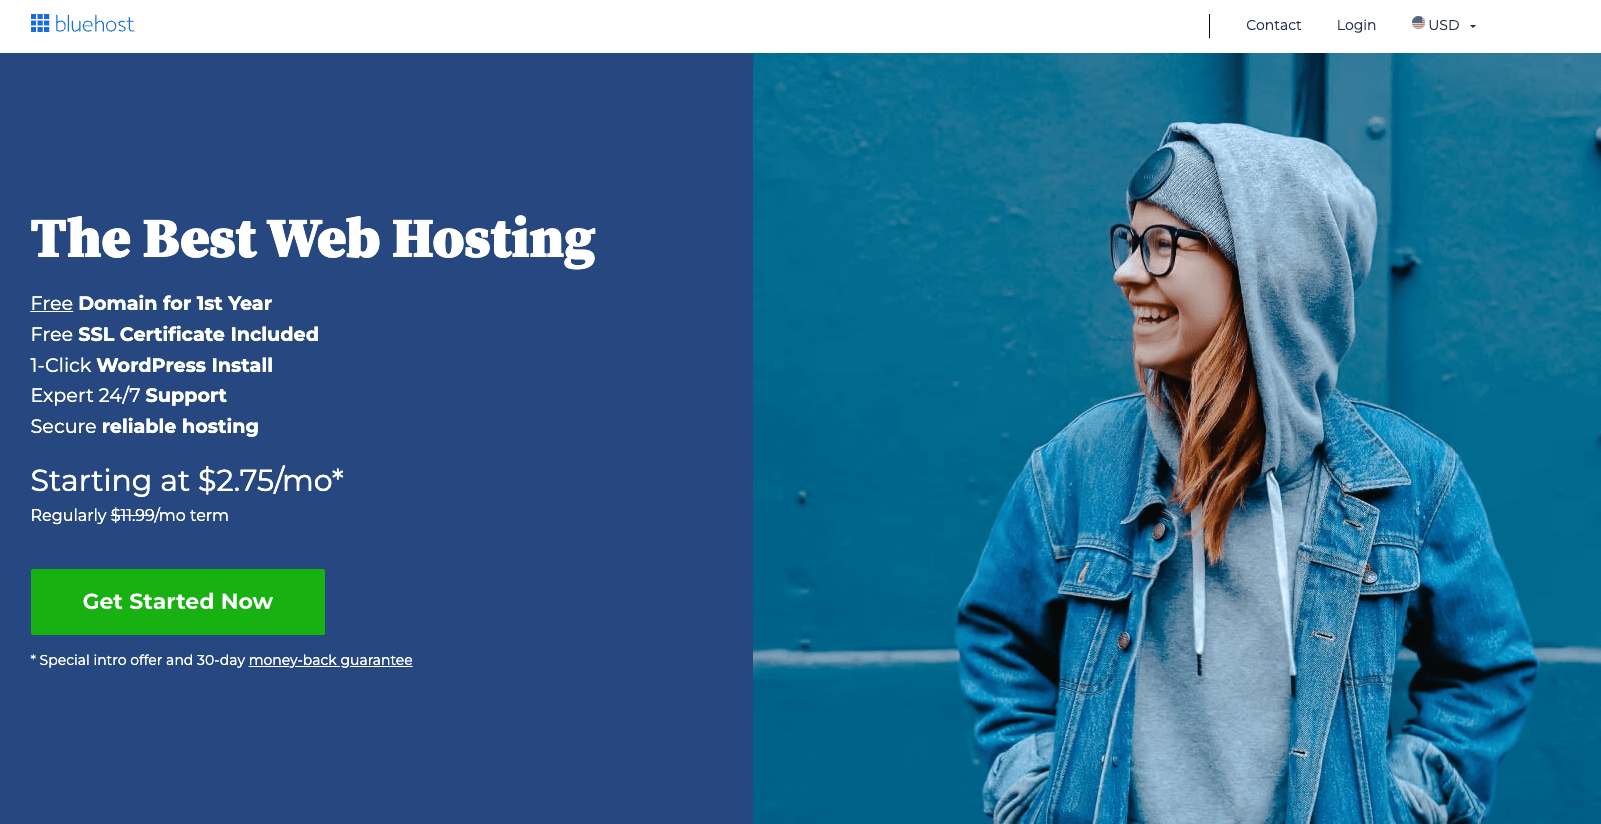 Bluehost special offer for Themeisle readers.